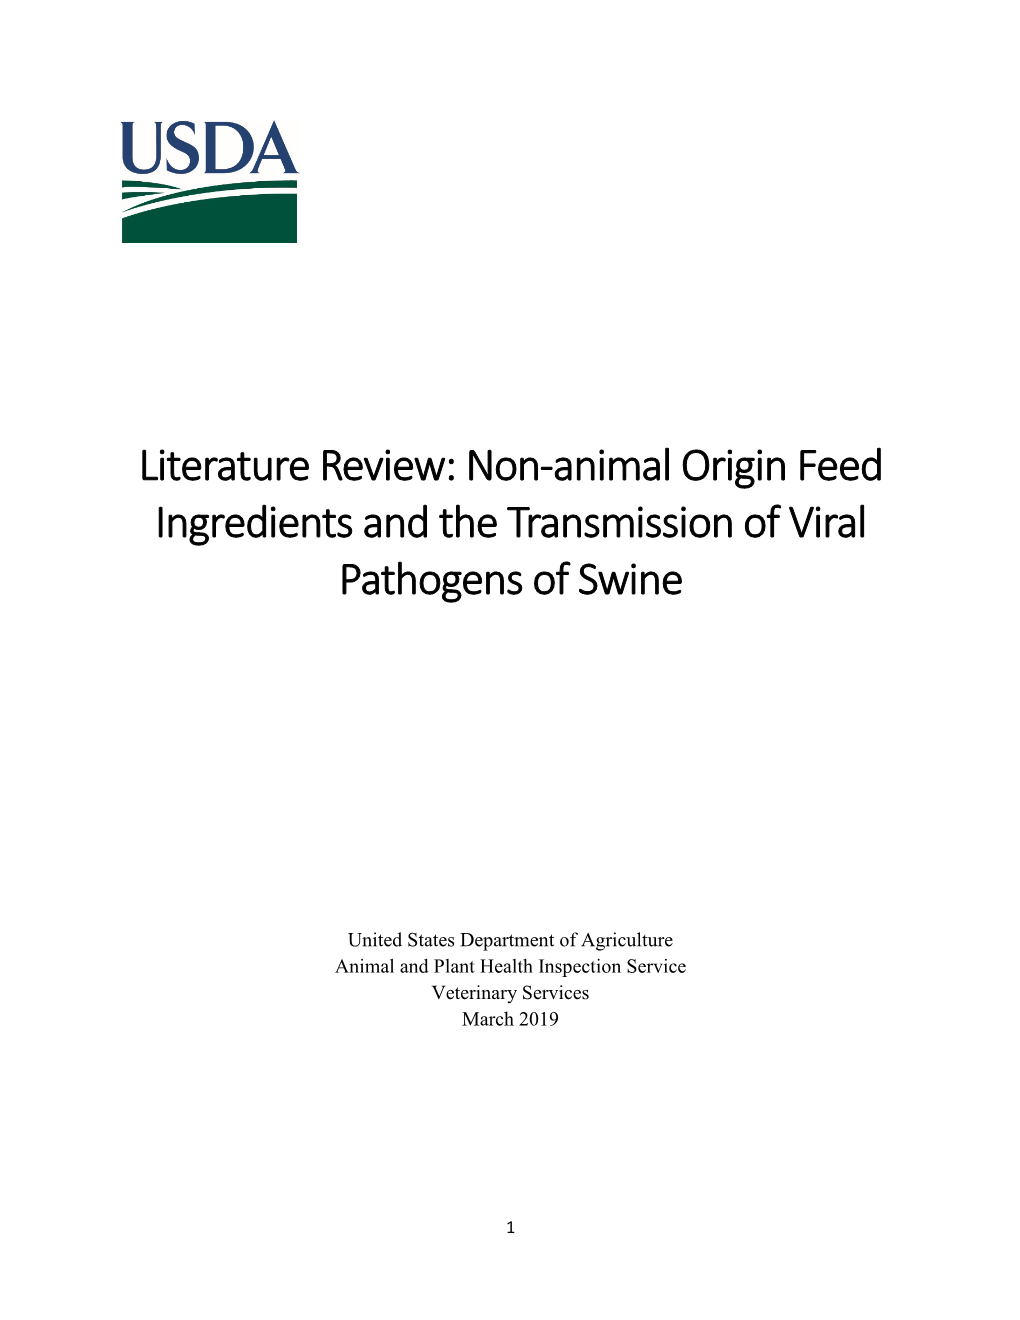 Non-Animal Origin Feed Ingredients and the Transmission of Viral Pathogens of Swine